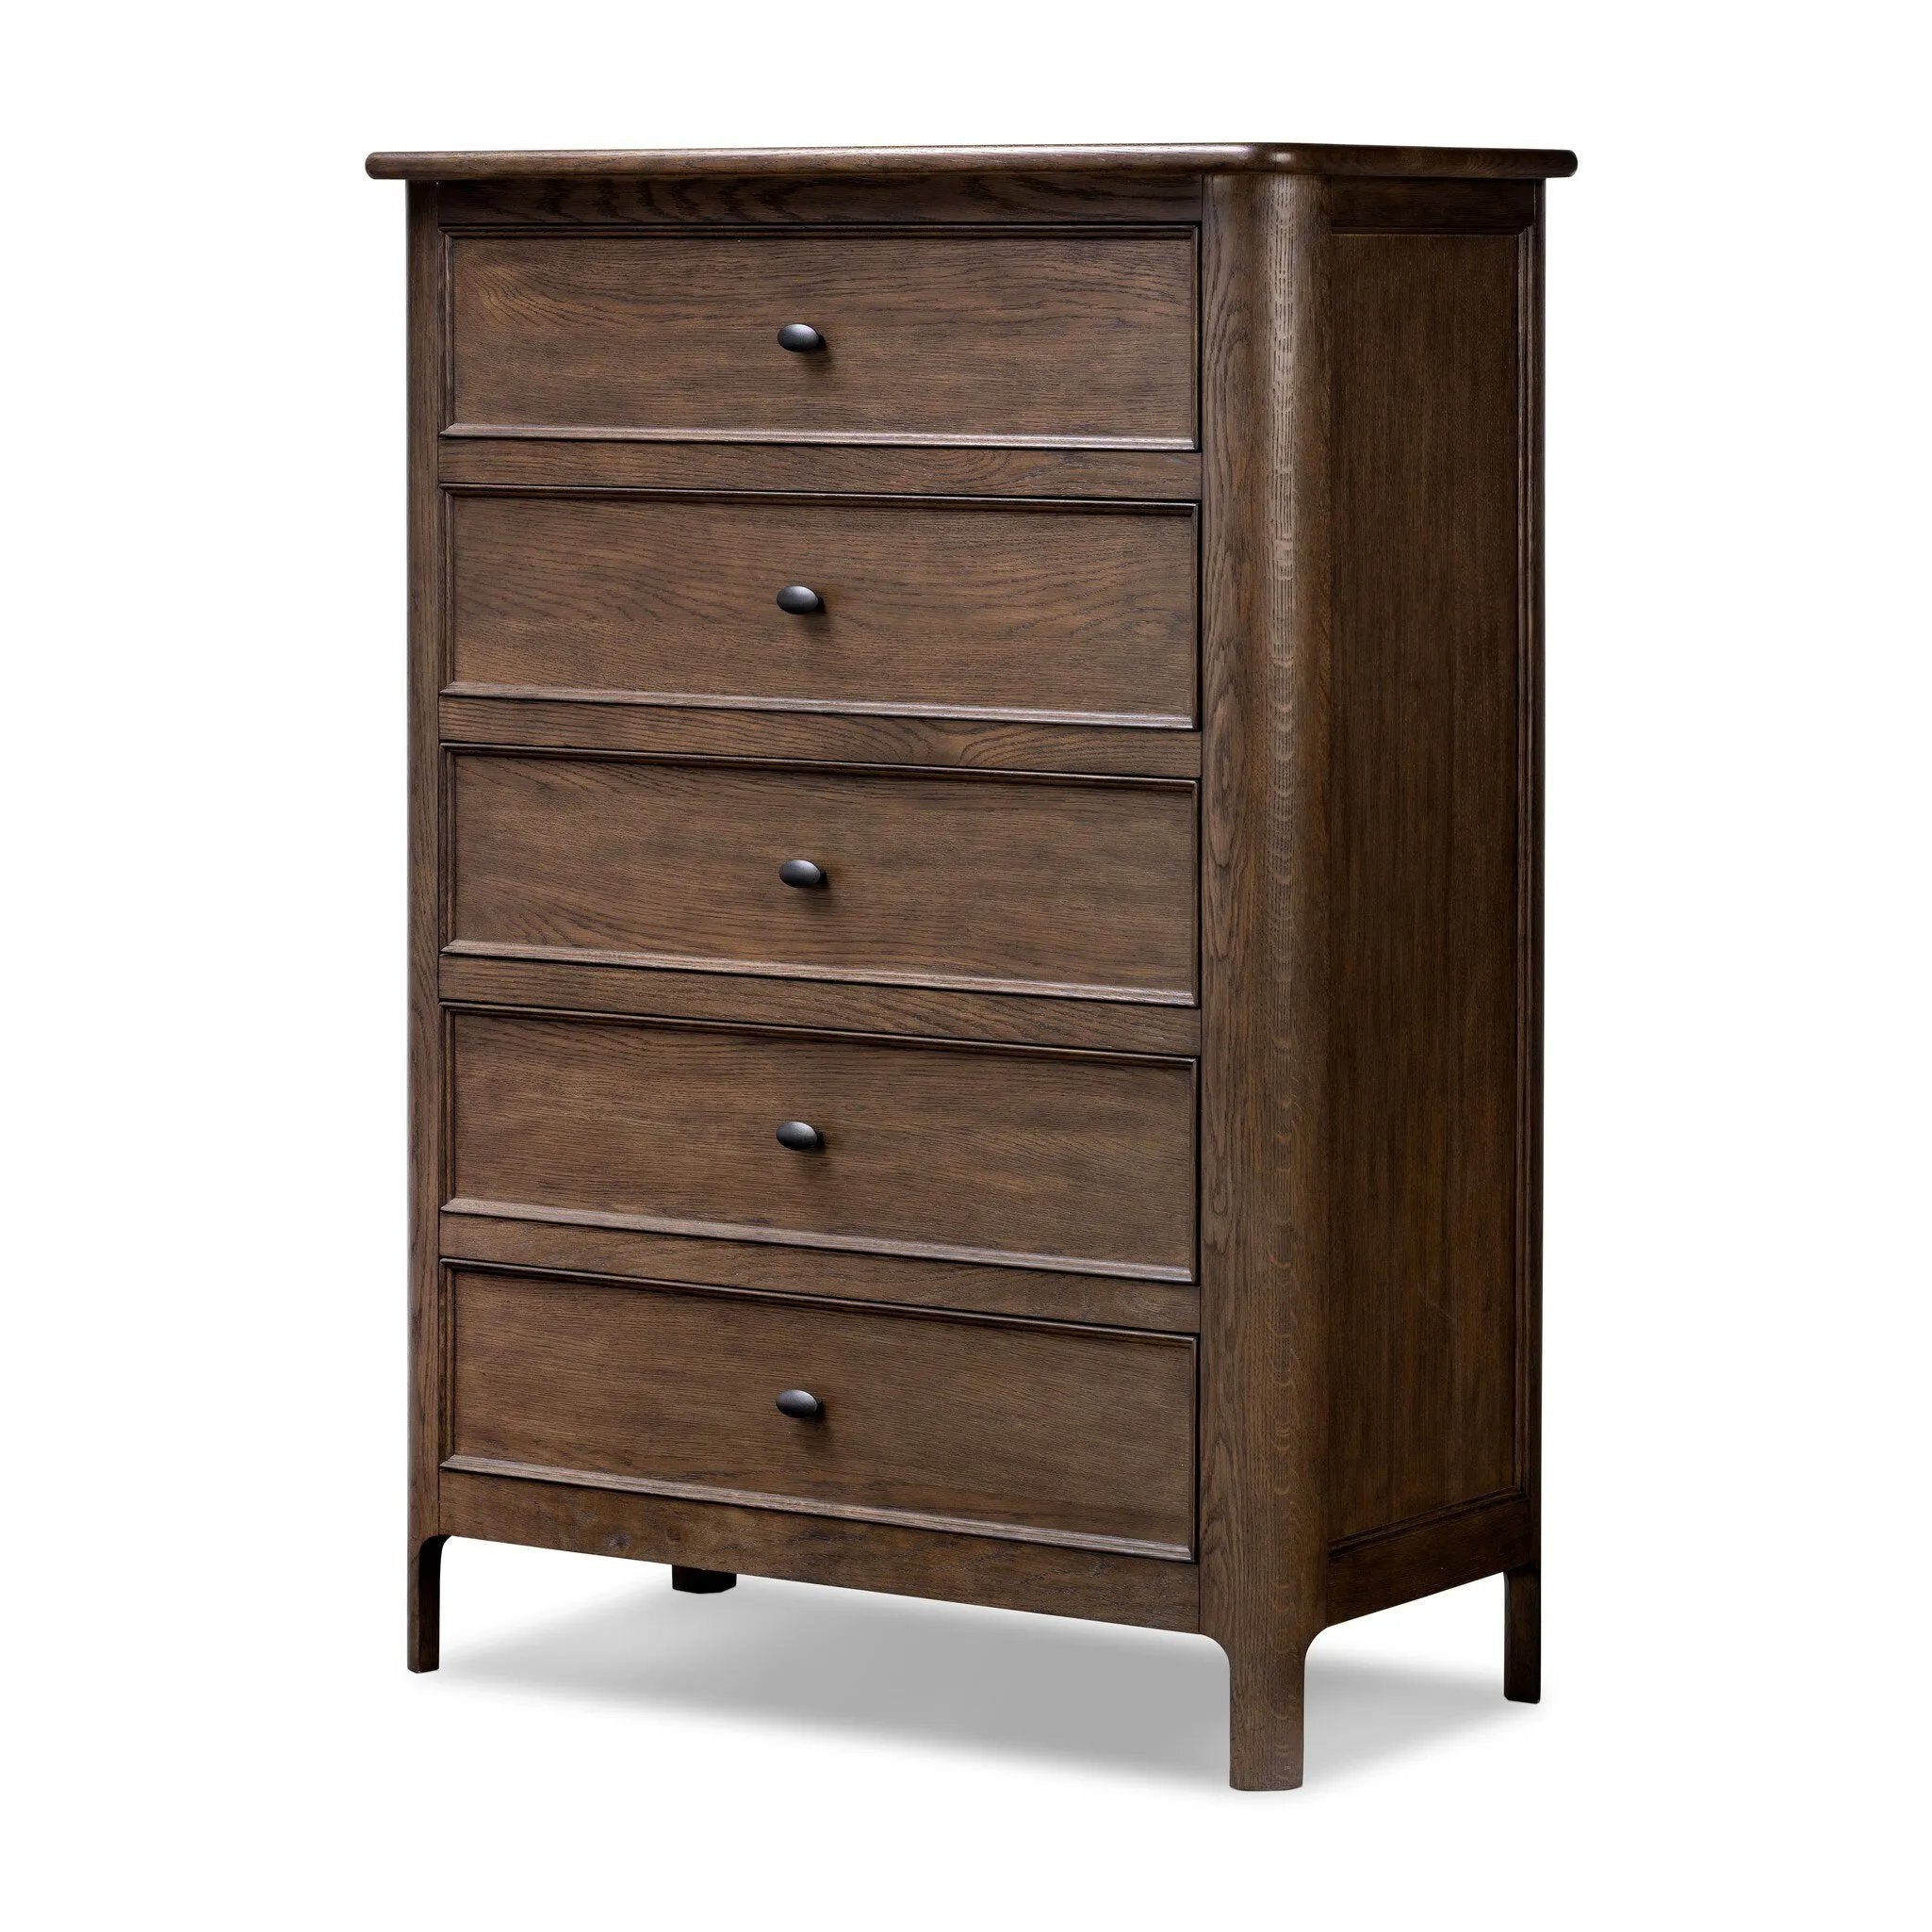 Like an heirloom tallboy with six drawers, this aged oak dresser has room for it all. Detailed with an overhang surface, carved edges top to bottom, angled legs and oval drawer pulls finished in dark gunmetal.Collection: Bolto Amethyst Home provides interior design, new home construction design consulting, vintage area rugs, and lighting in the Alpharetta metro area.